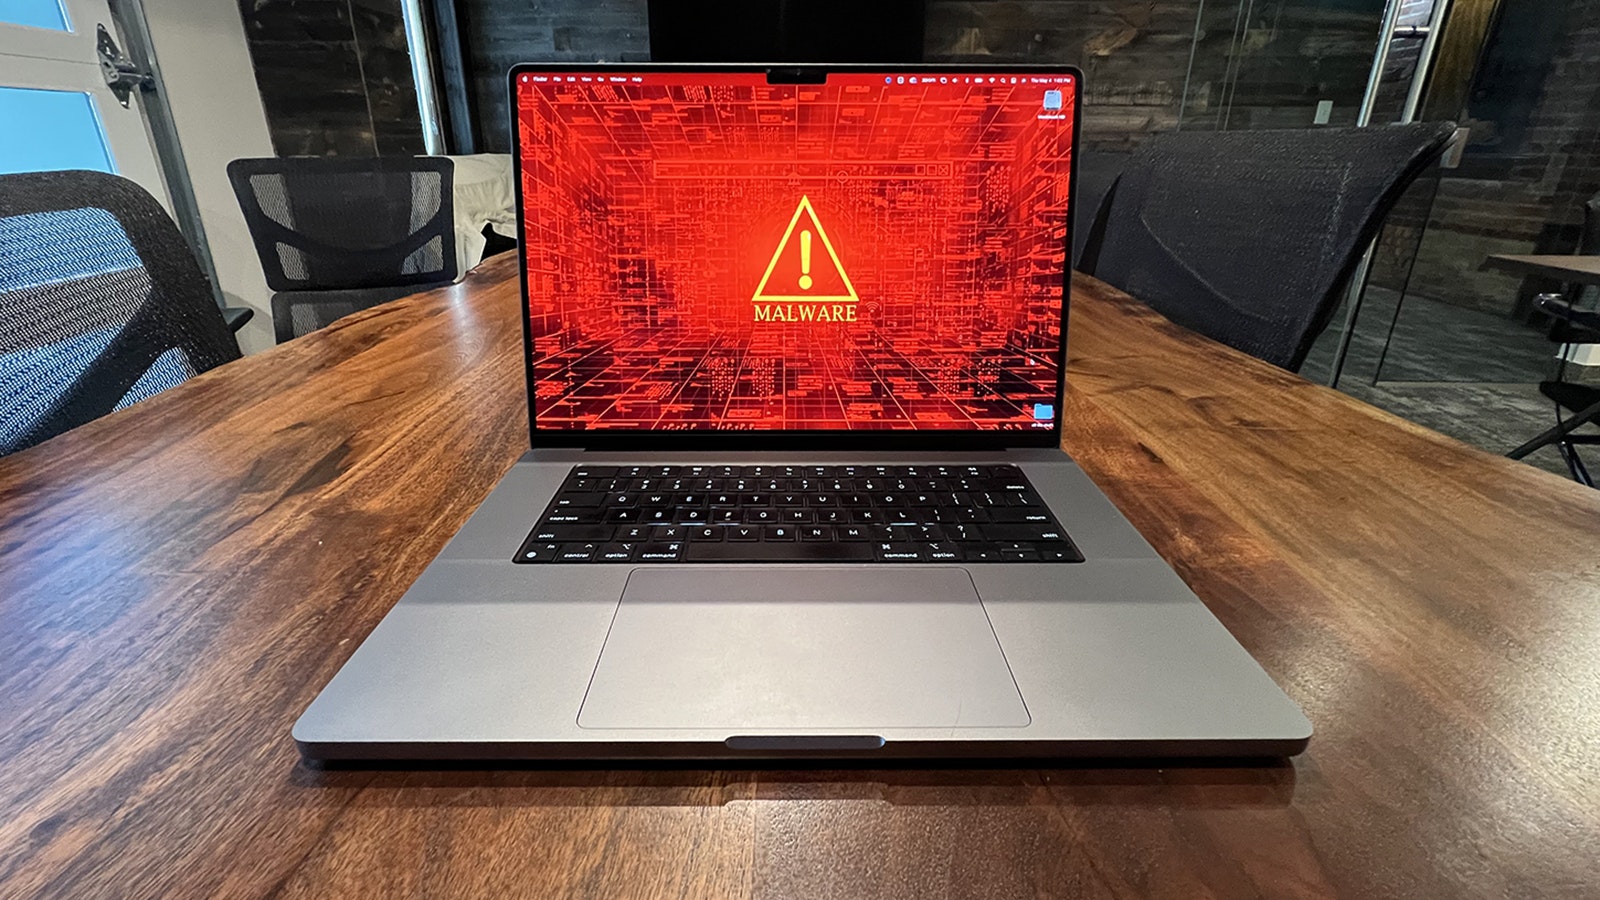 Crypto Mining On Mac: How macOS Malware is on the Rise